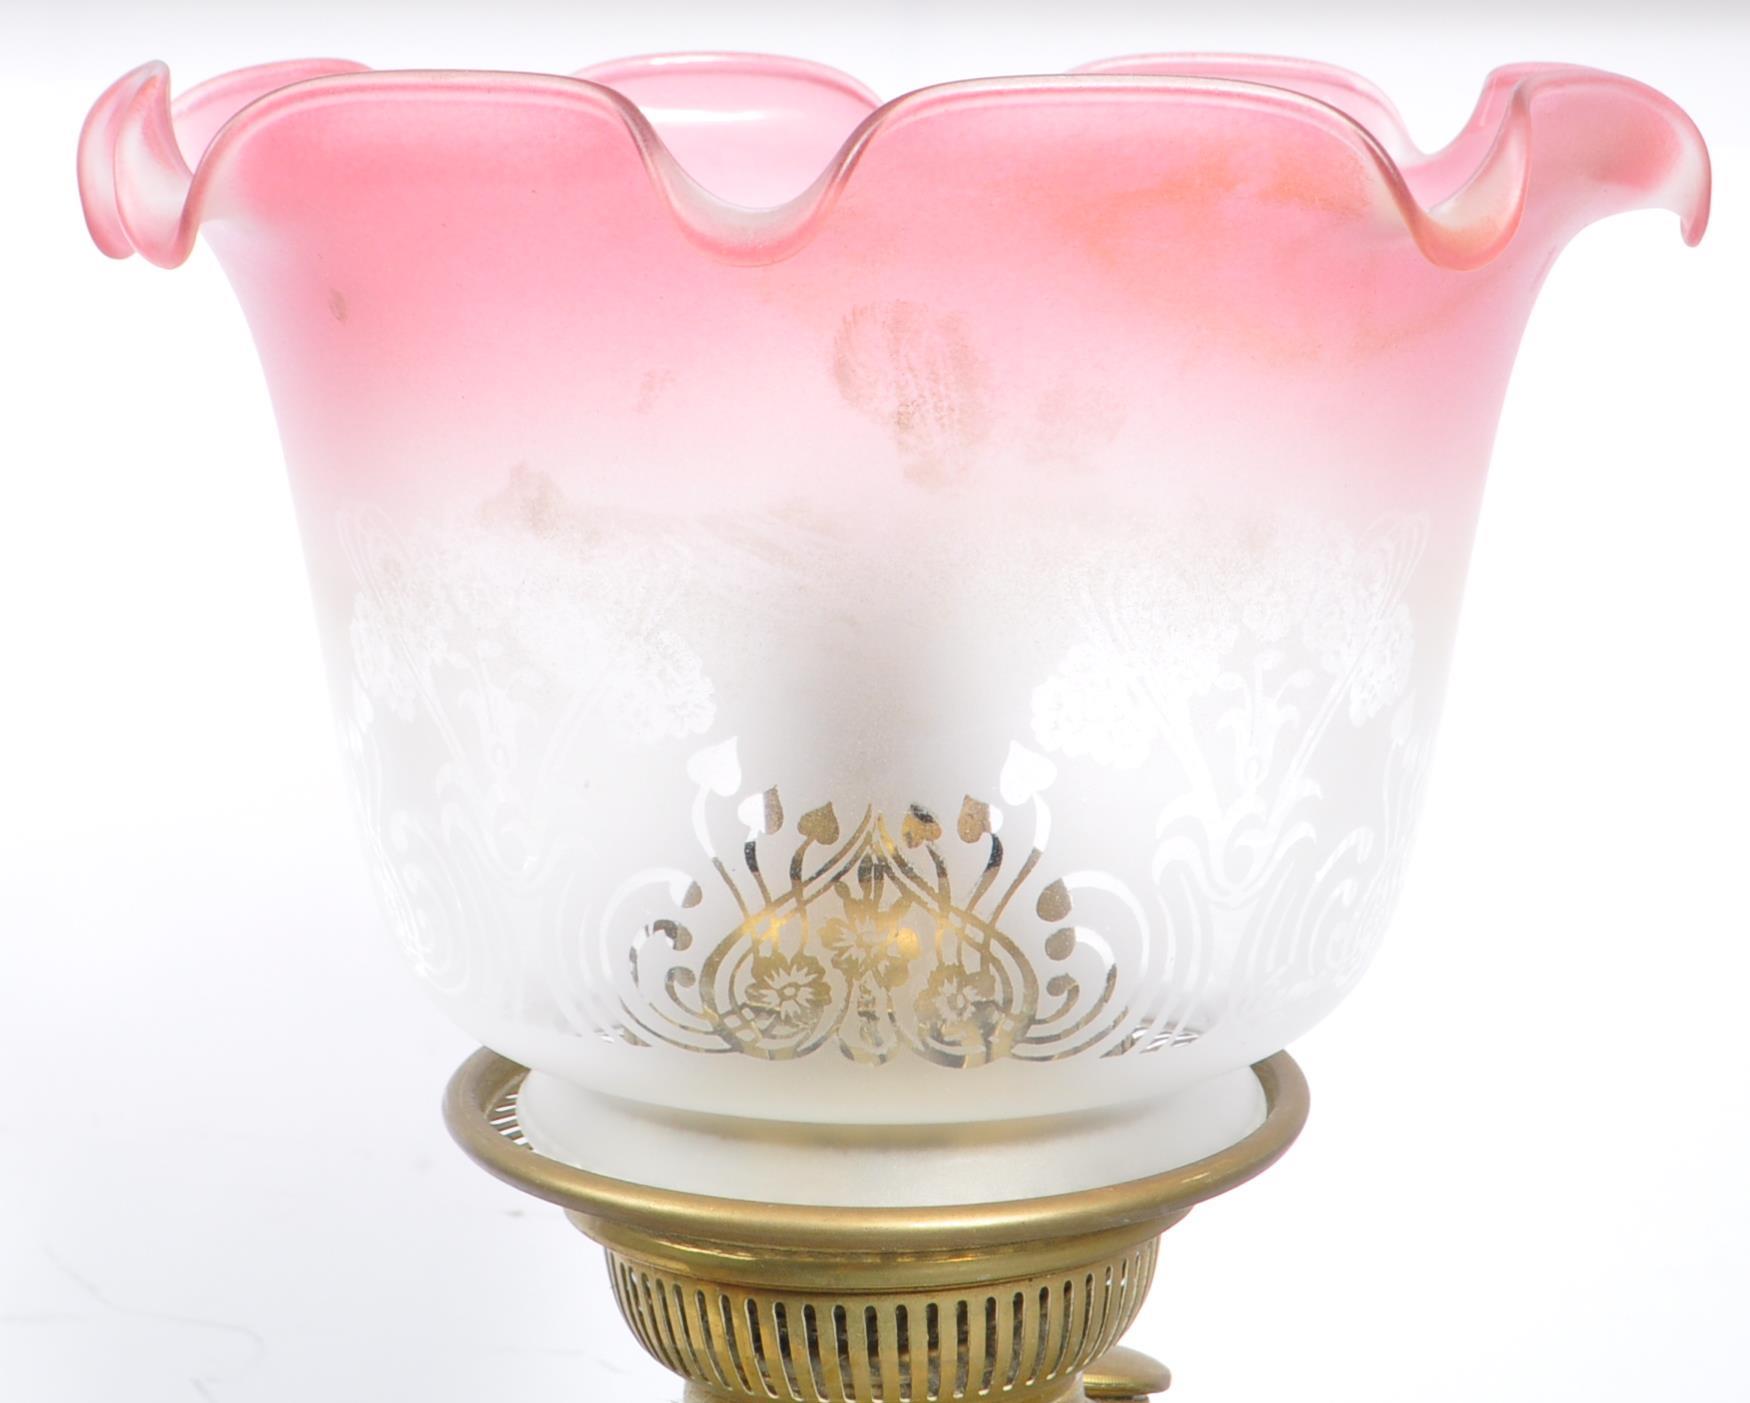 ART NOUVEAU MANNER CONVERTED OIL LAMP WITH PINK SHADE - Image 4 of 5